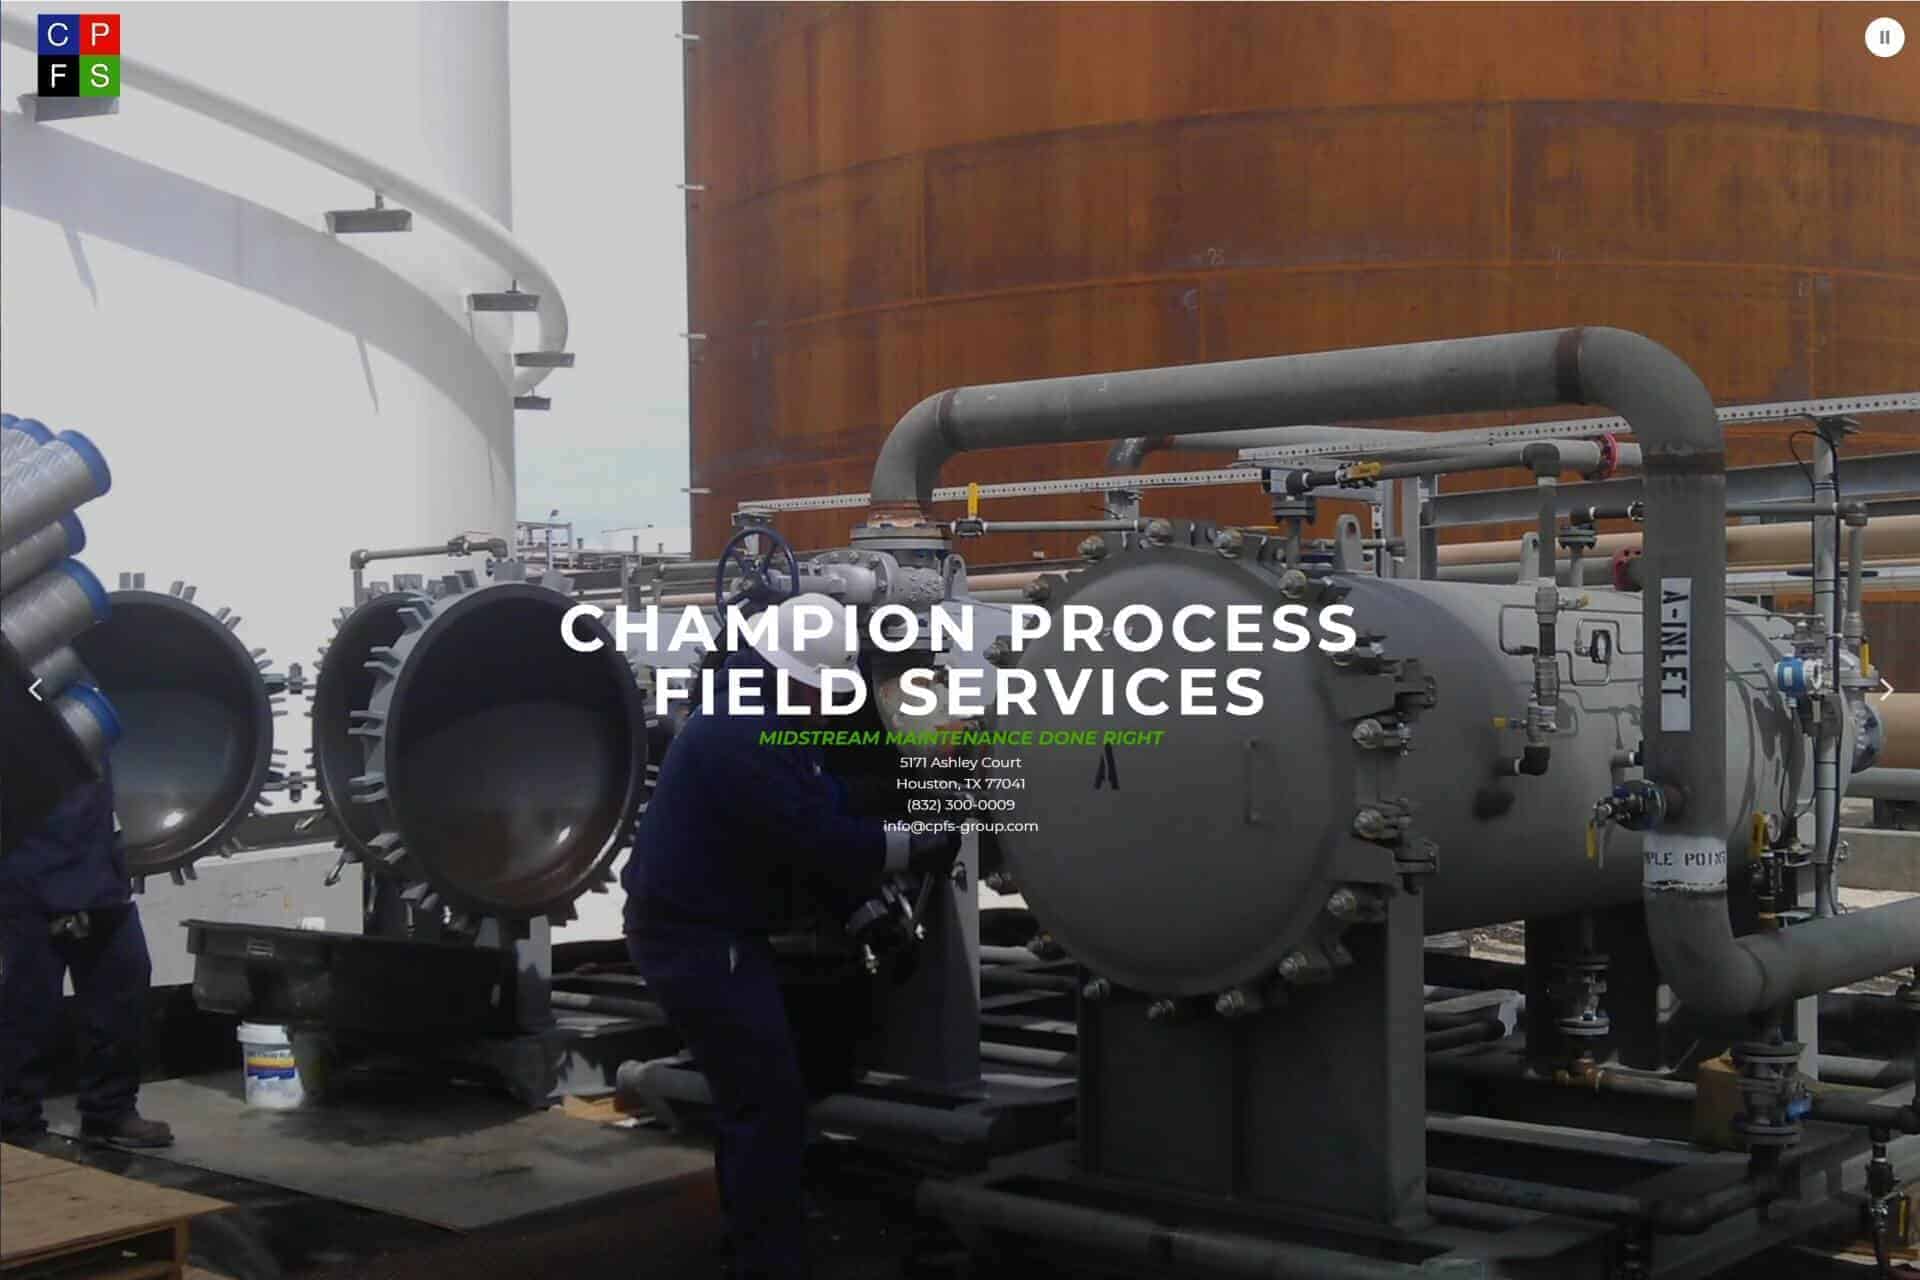 Champion Process Field Services (CPFS) by Texas Industrial Control Manufacturing